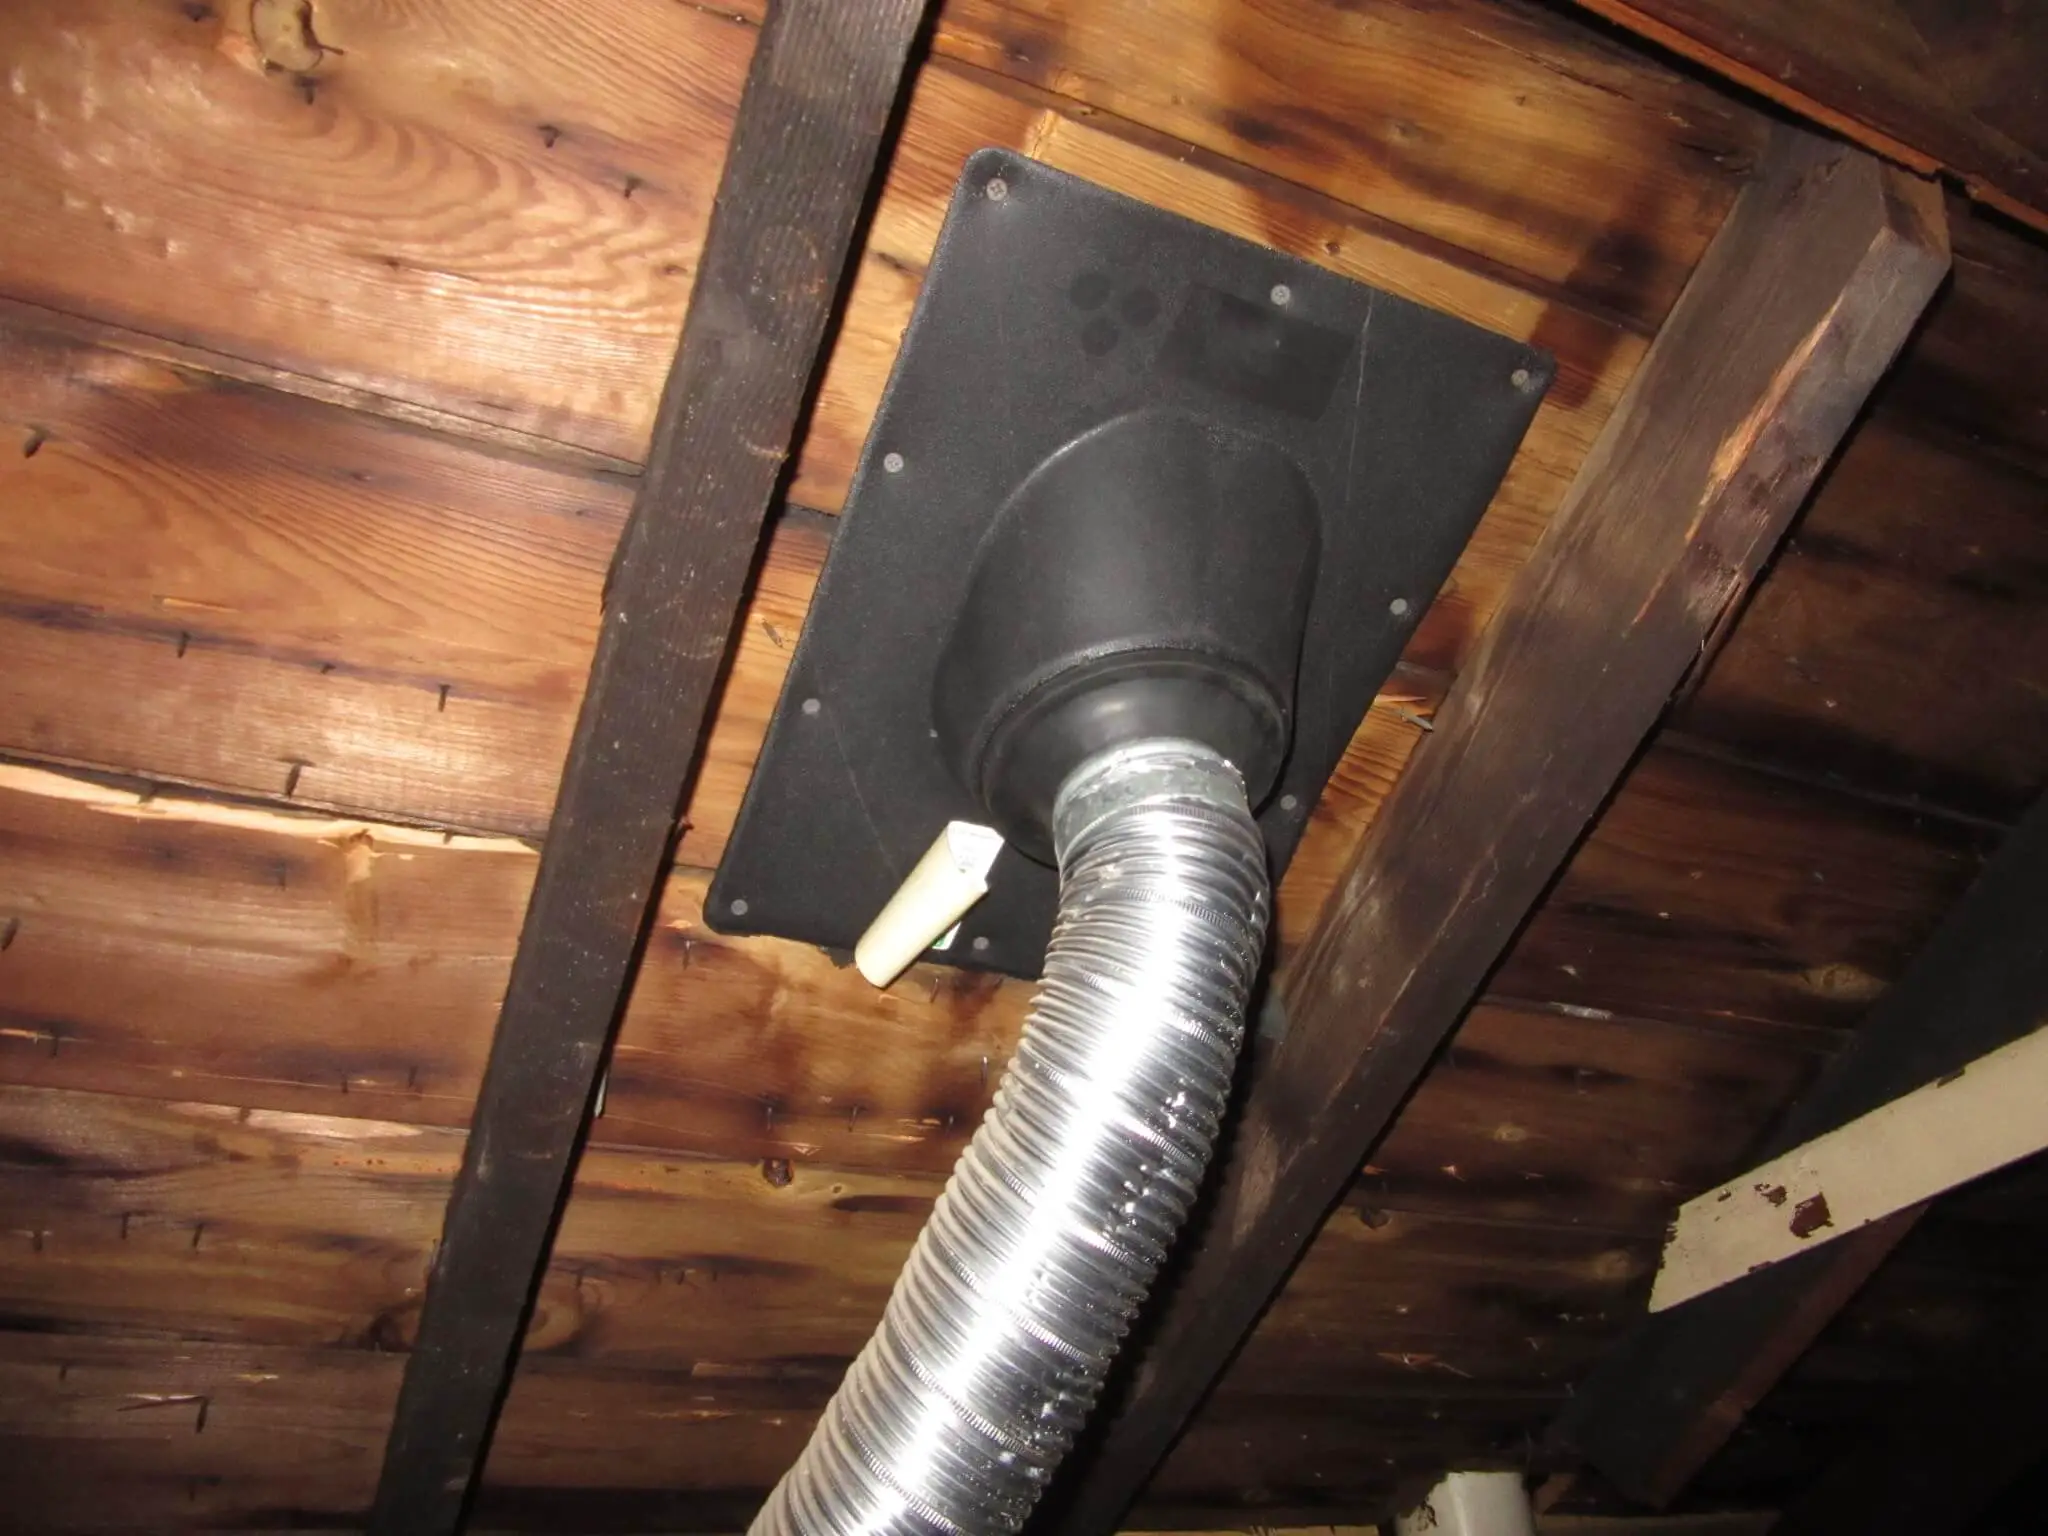 The best of the worst home inspection photos of 2015: Amen to duct tape ...